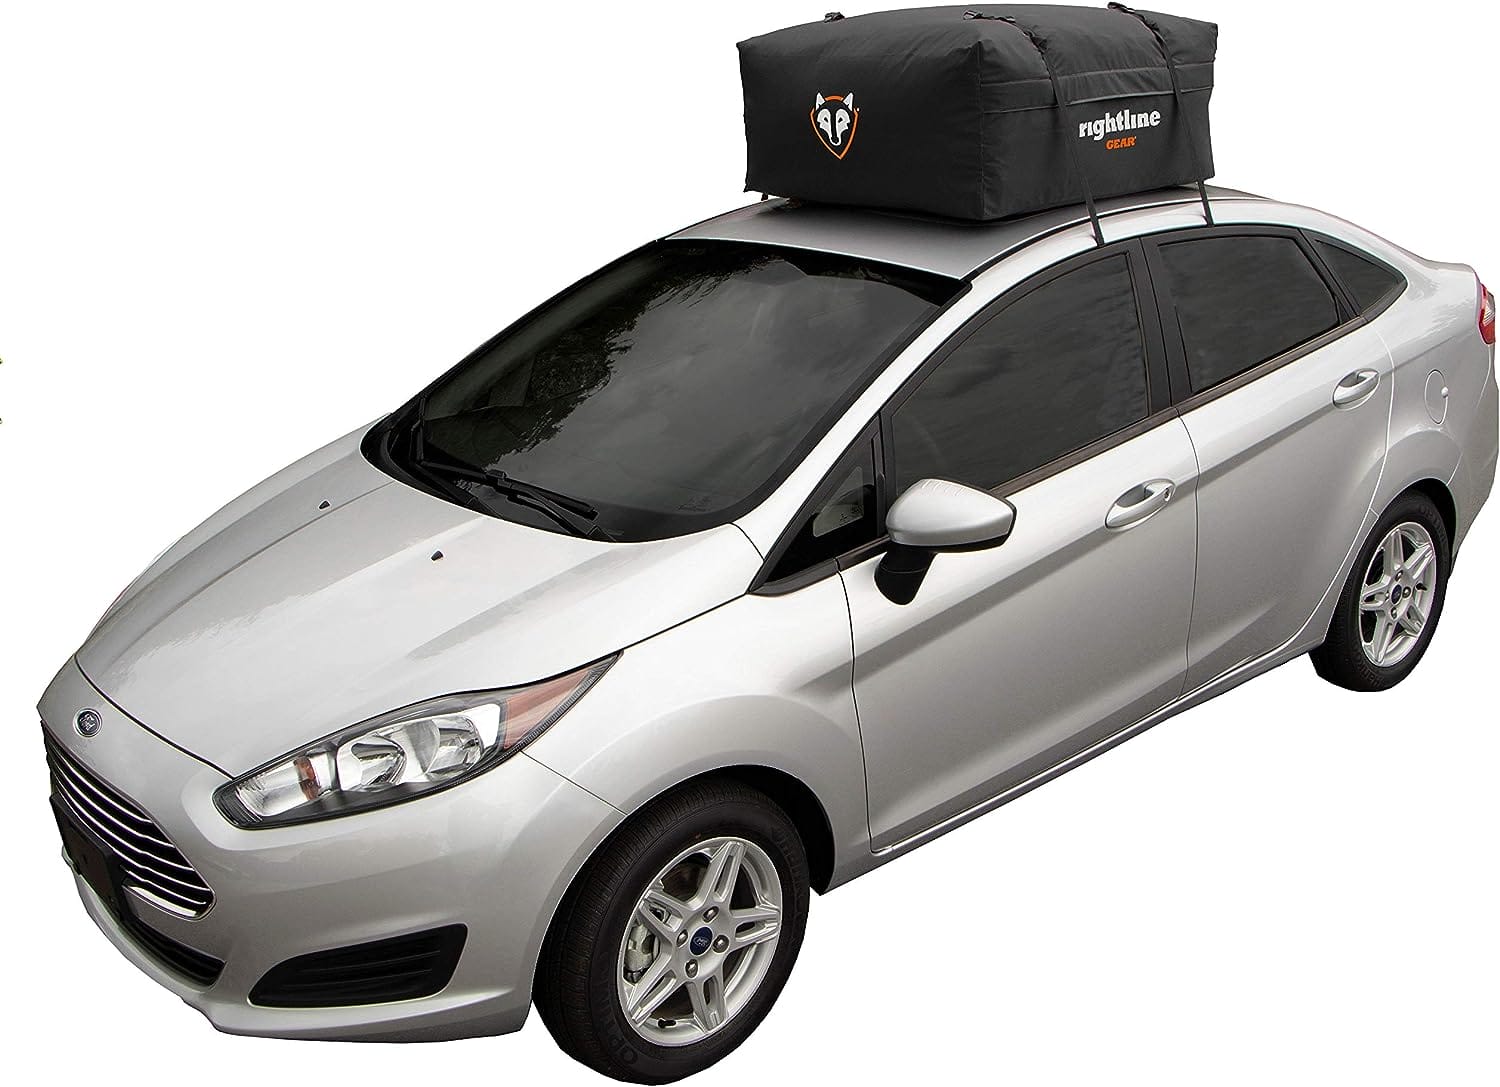 Rightline Gear Range Rooftop Cargo Carrier Review